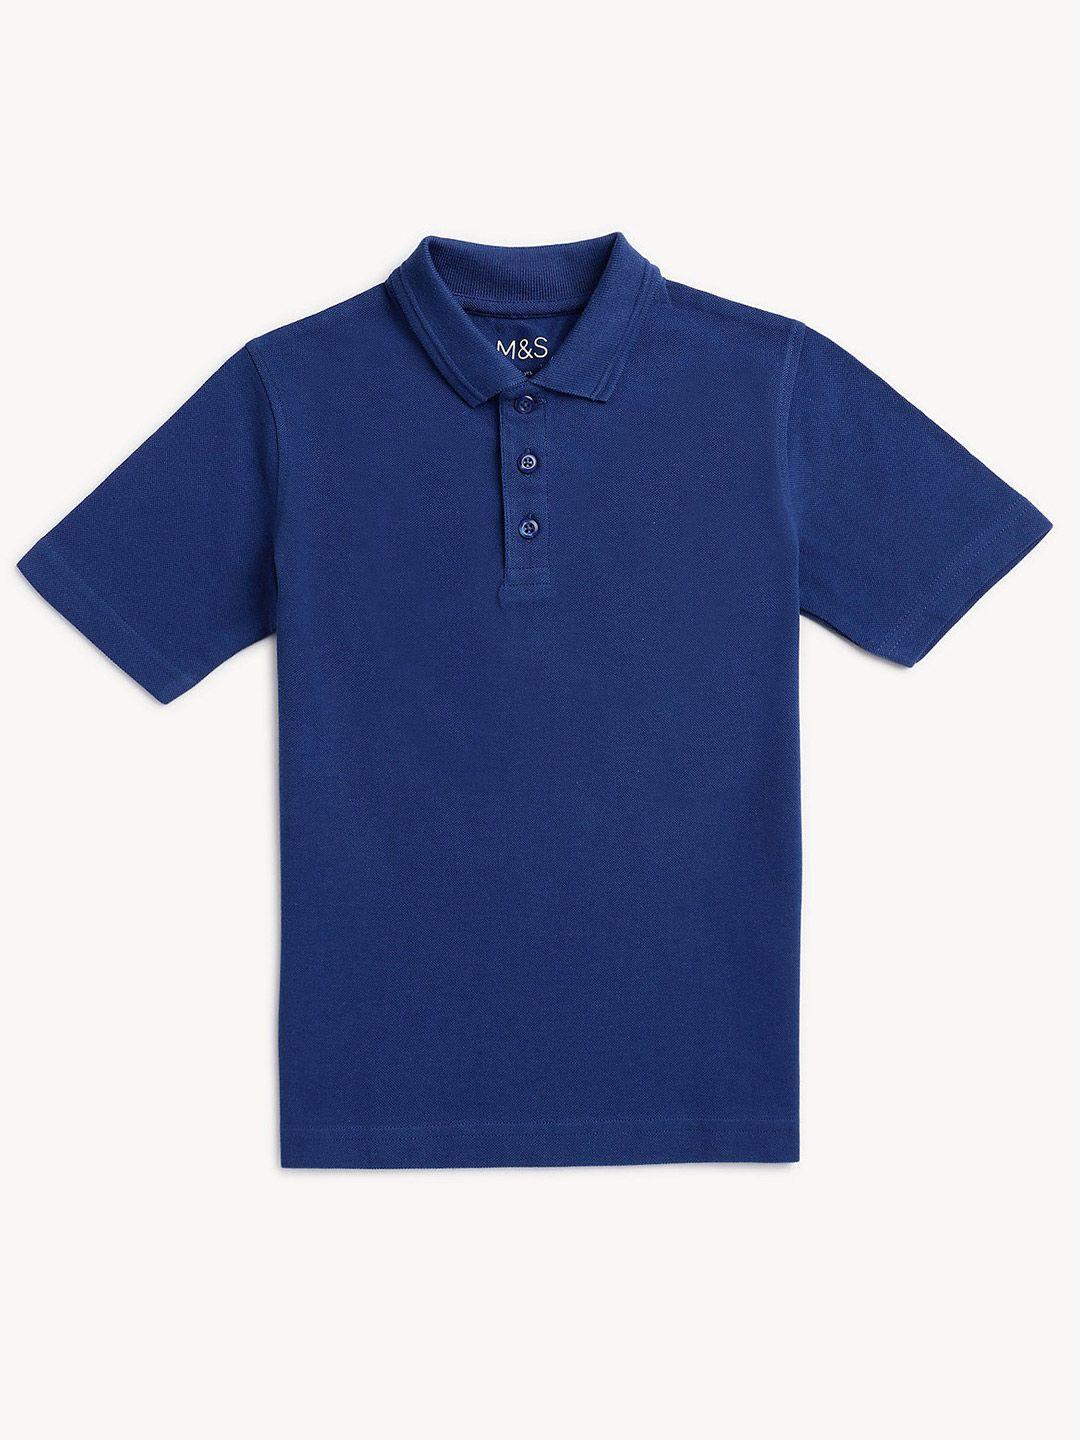 marks & spencer boys polo collar knitted pure cotton t-shirt